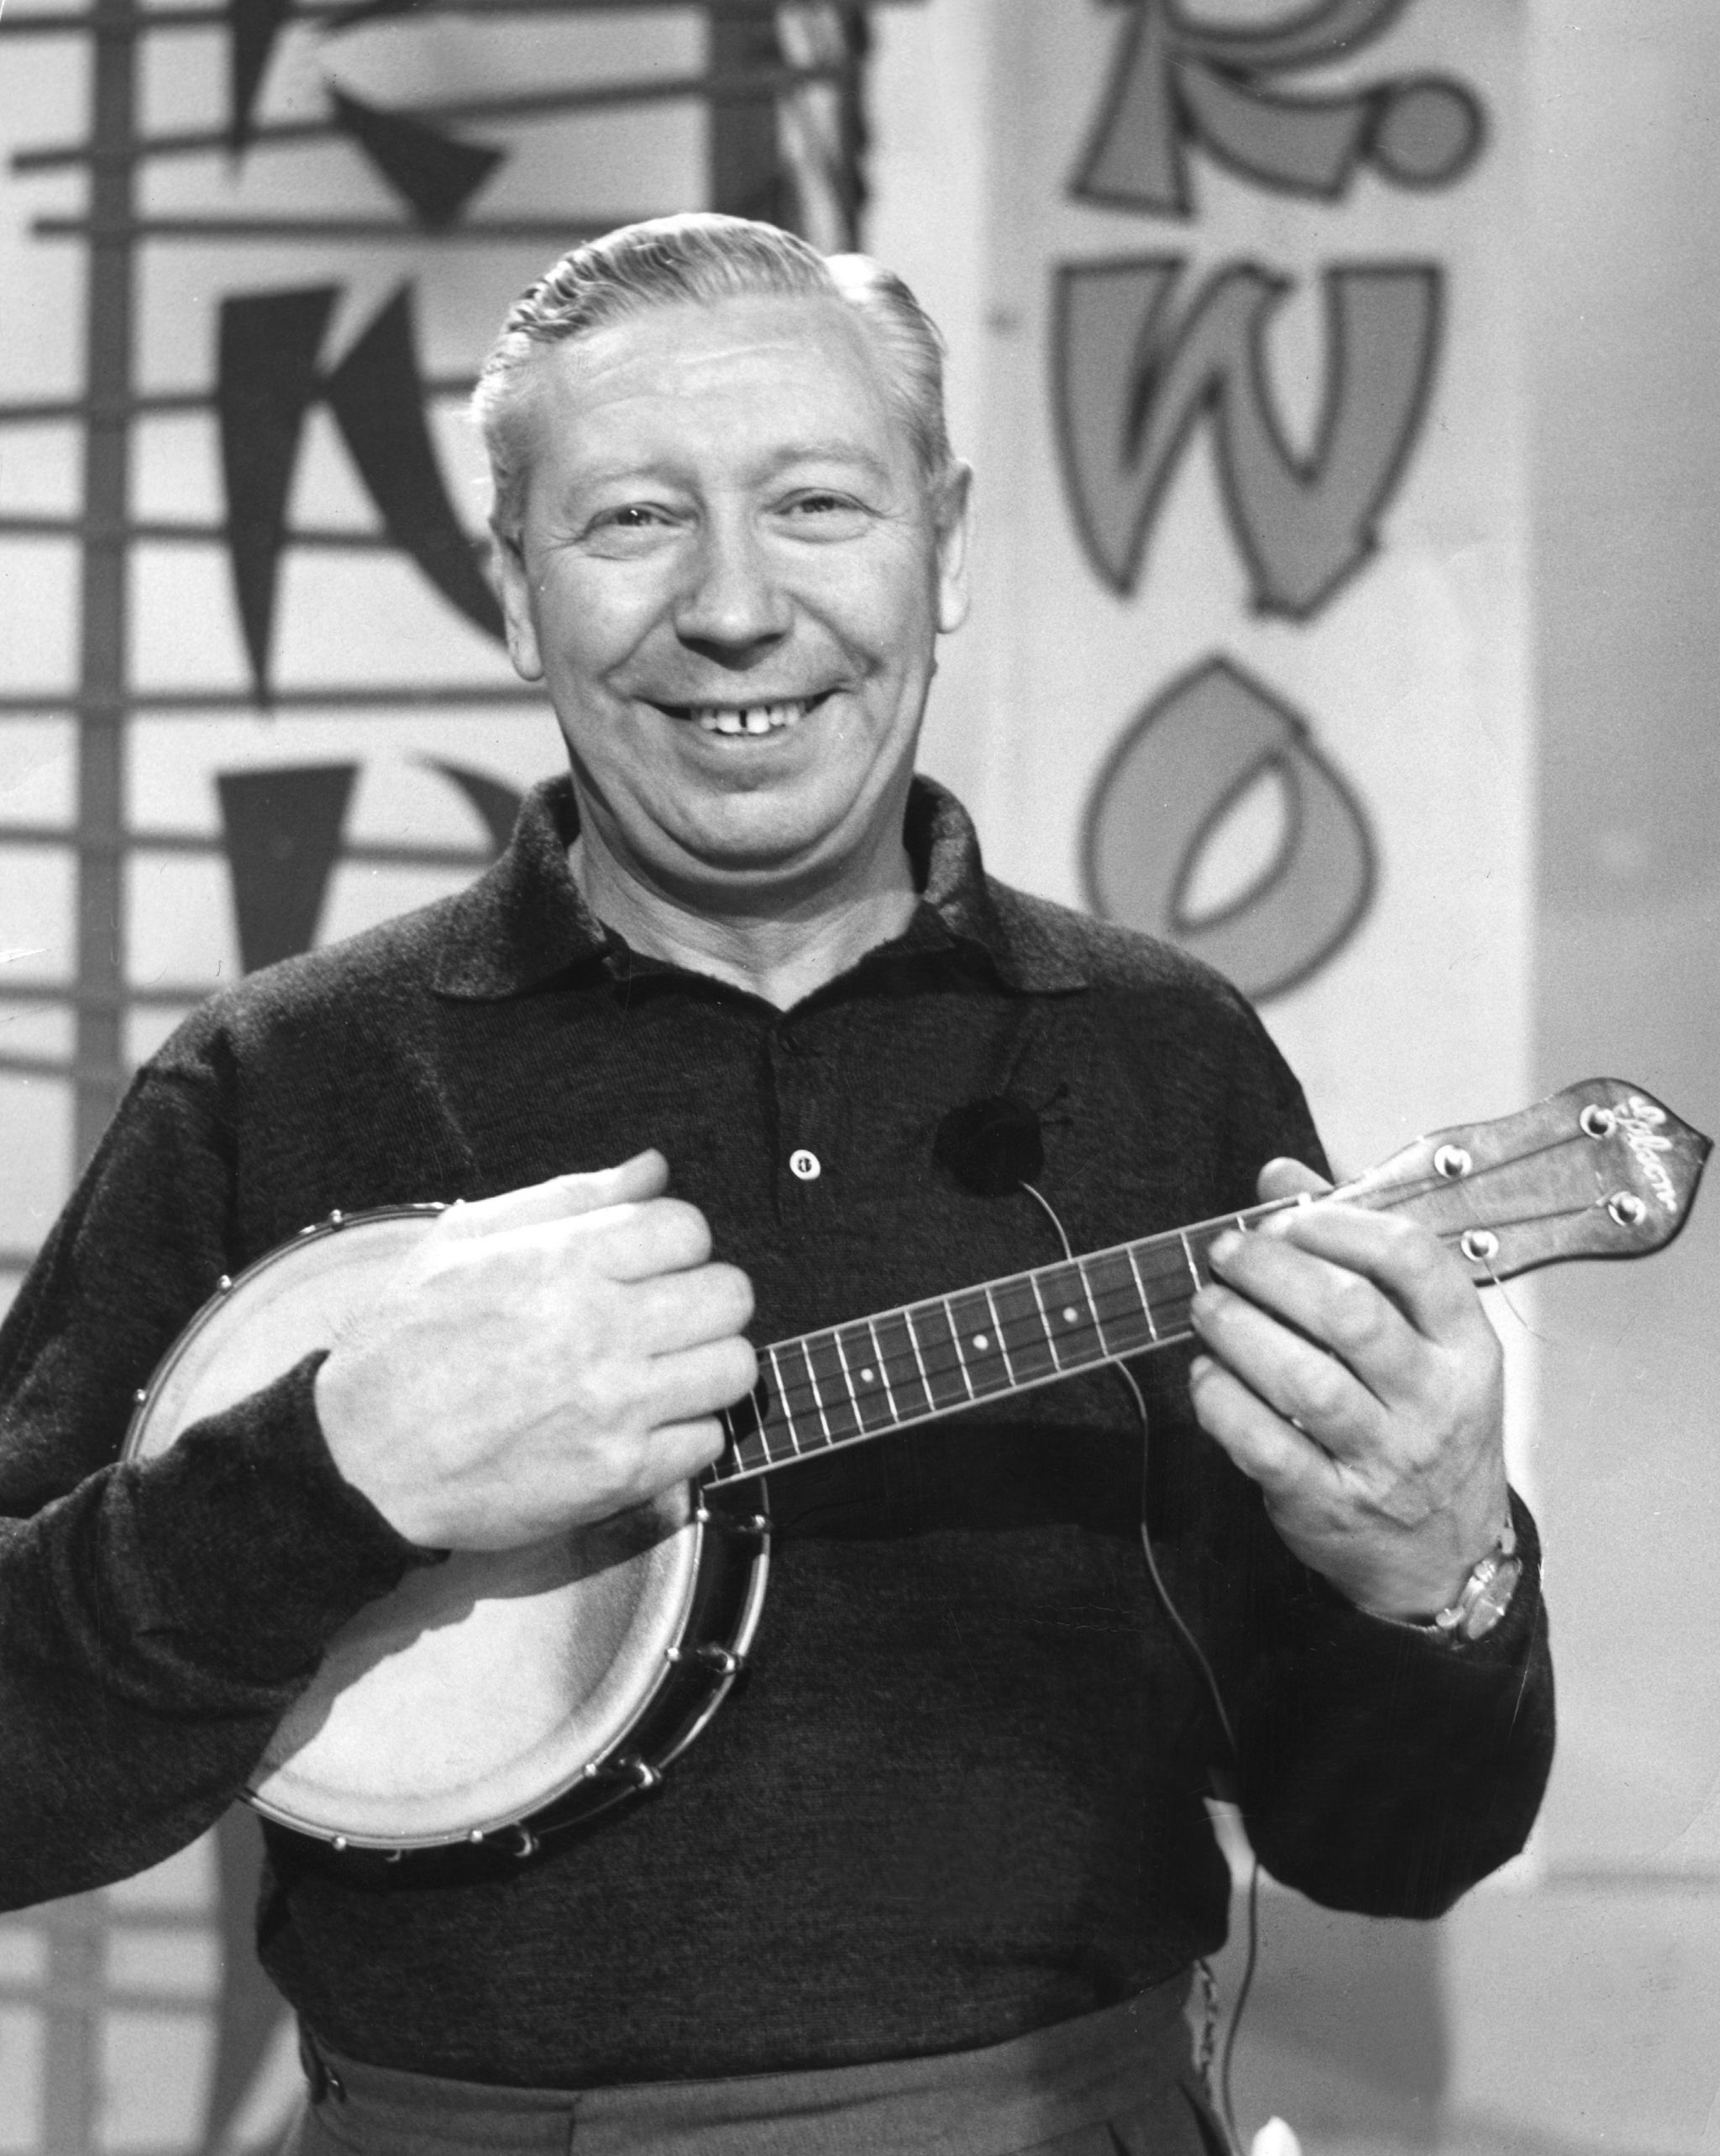 George Formby playing on The Friday Show on 16 December 1960.